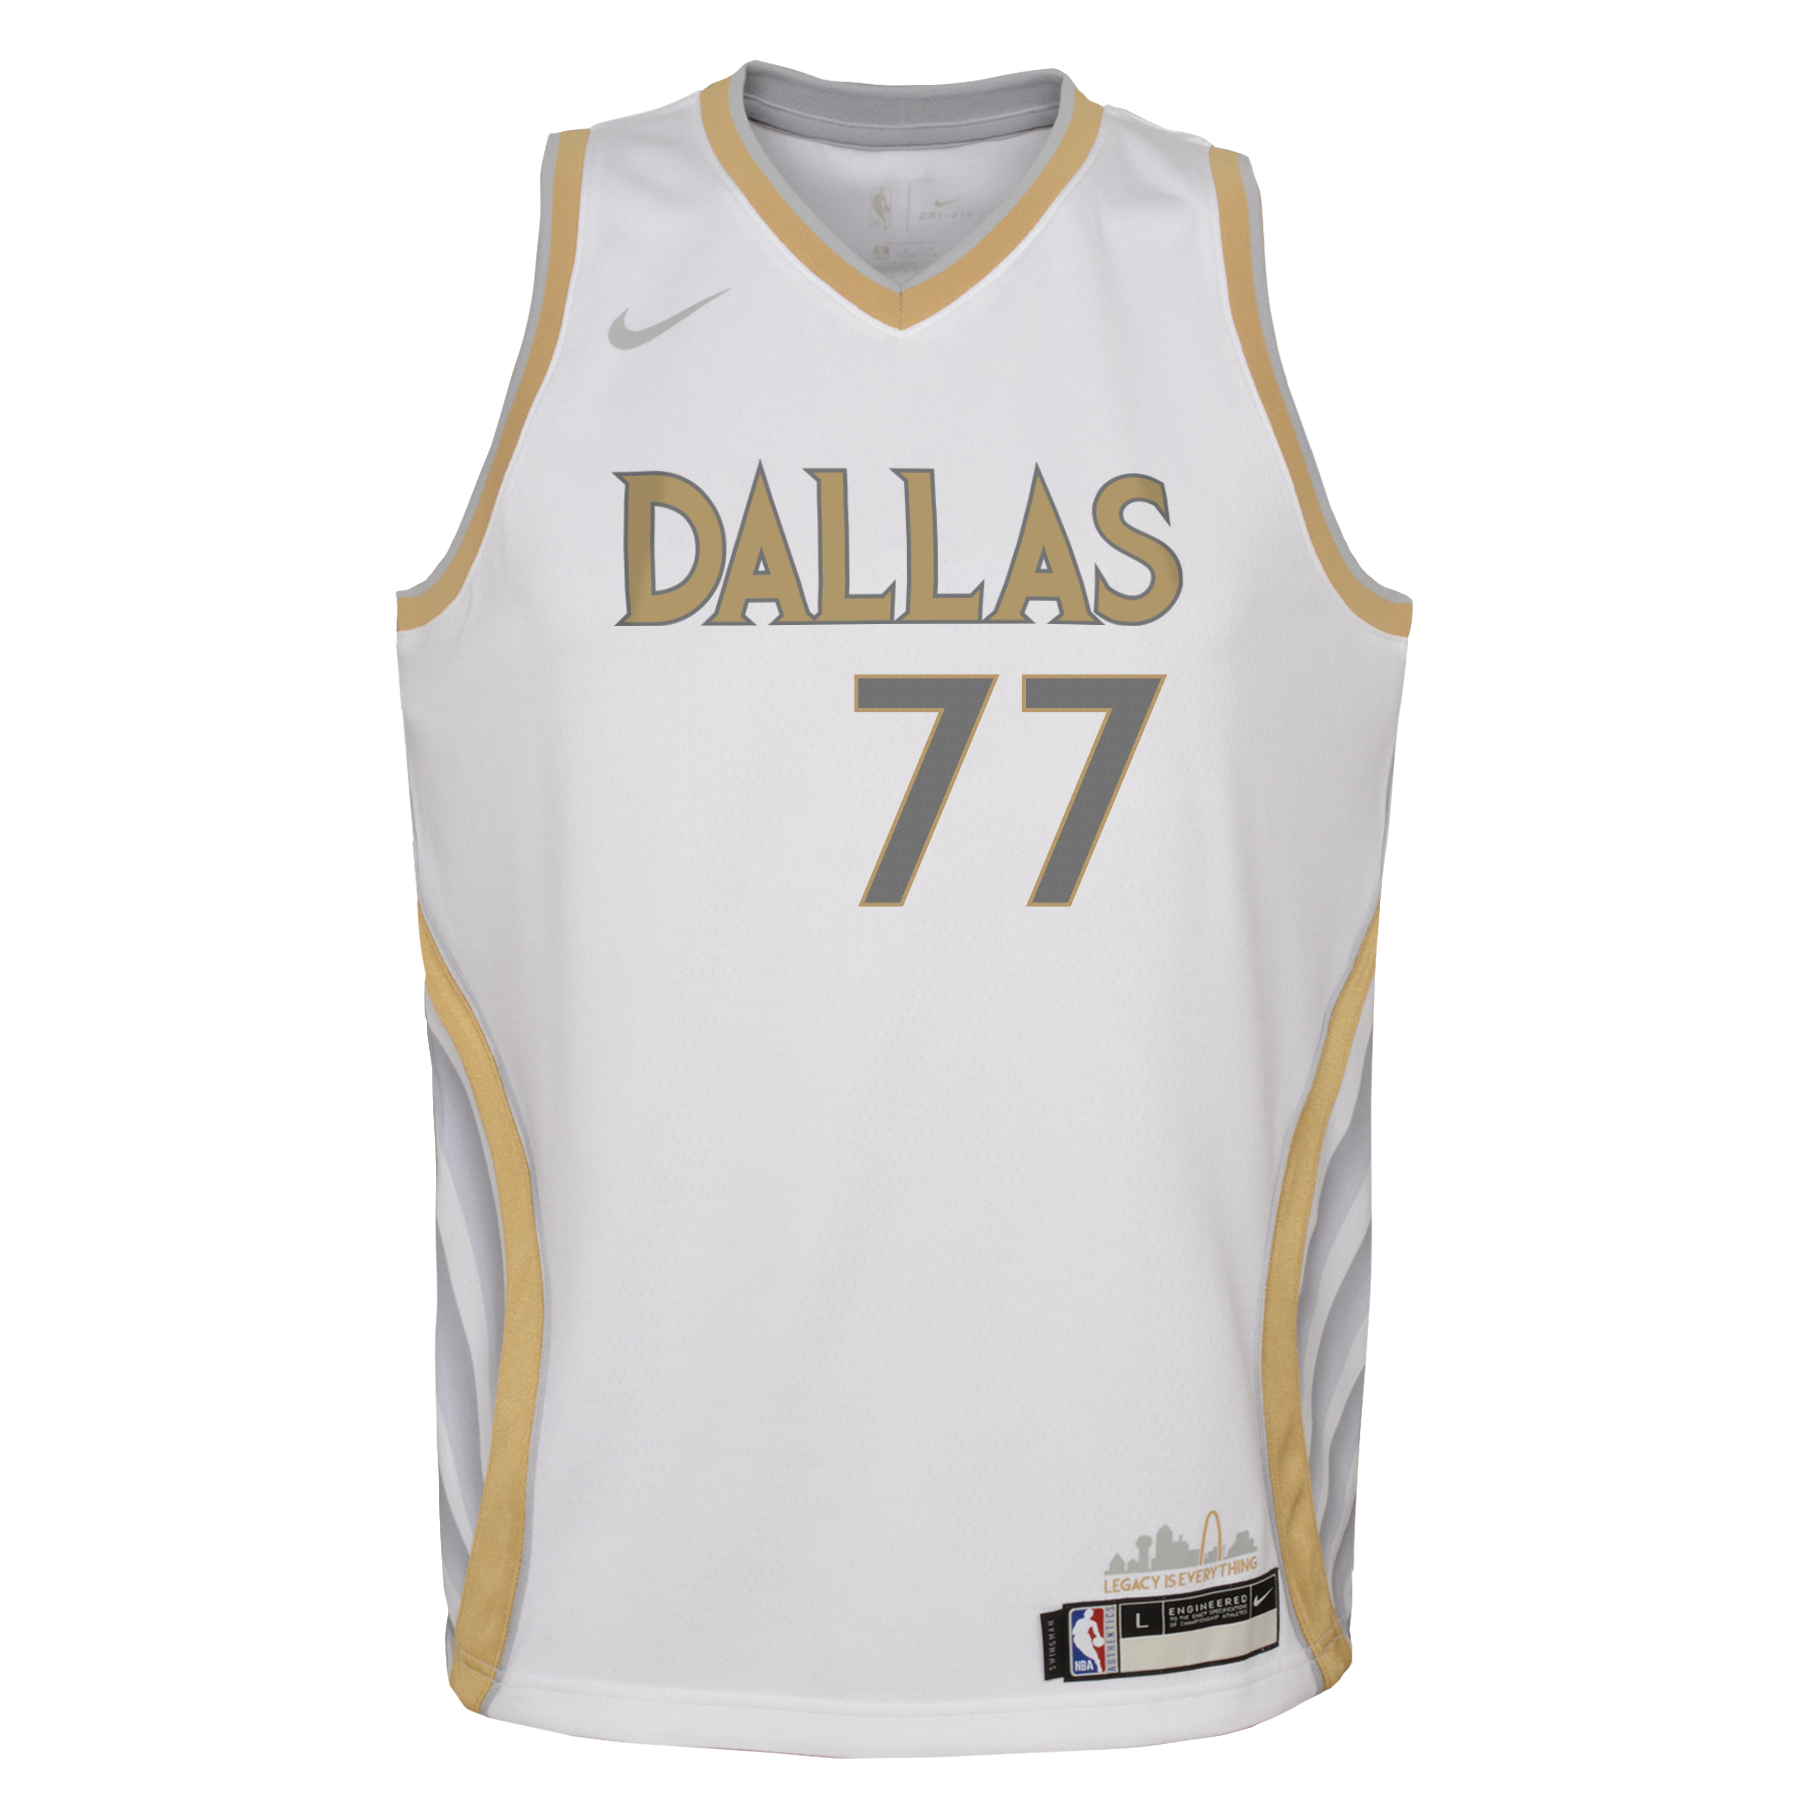 2020-21 Nike NBA City Edition Jerseys: Available Now